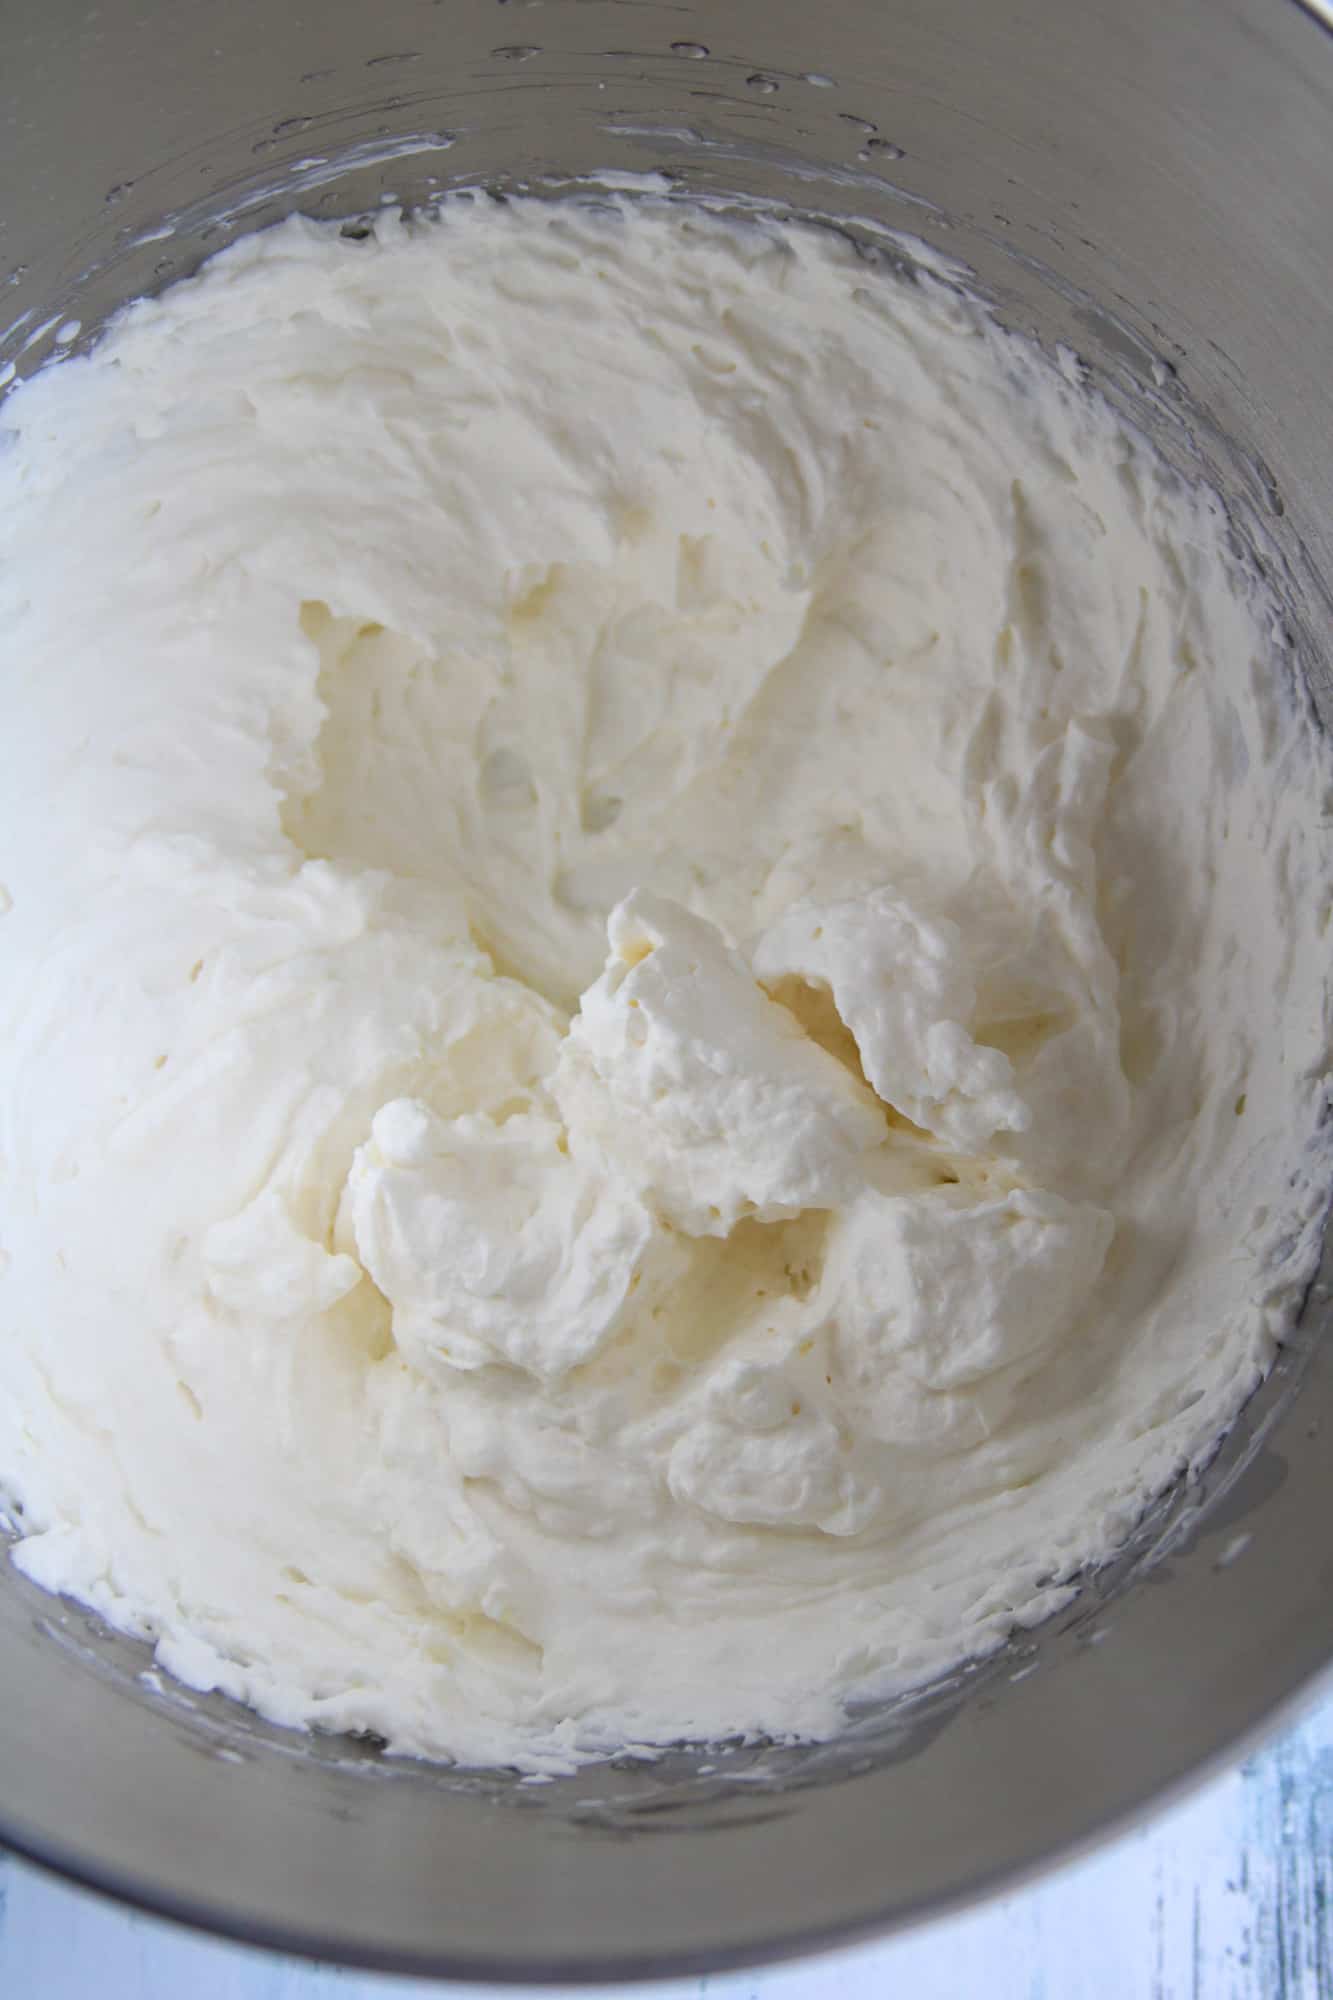 The whipped cream filling for Cream buns.